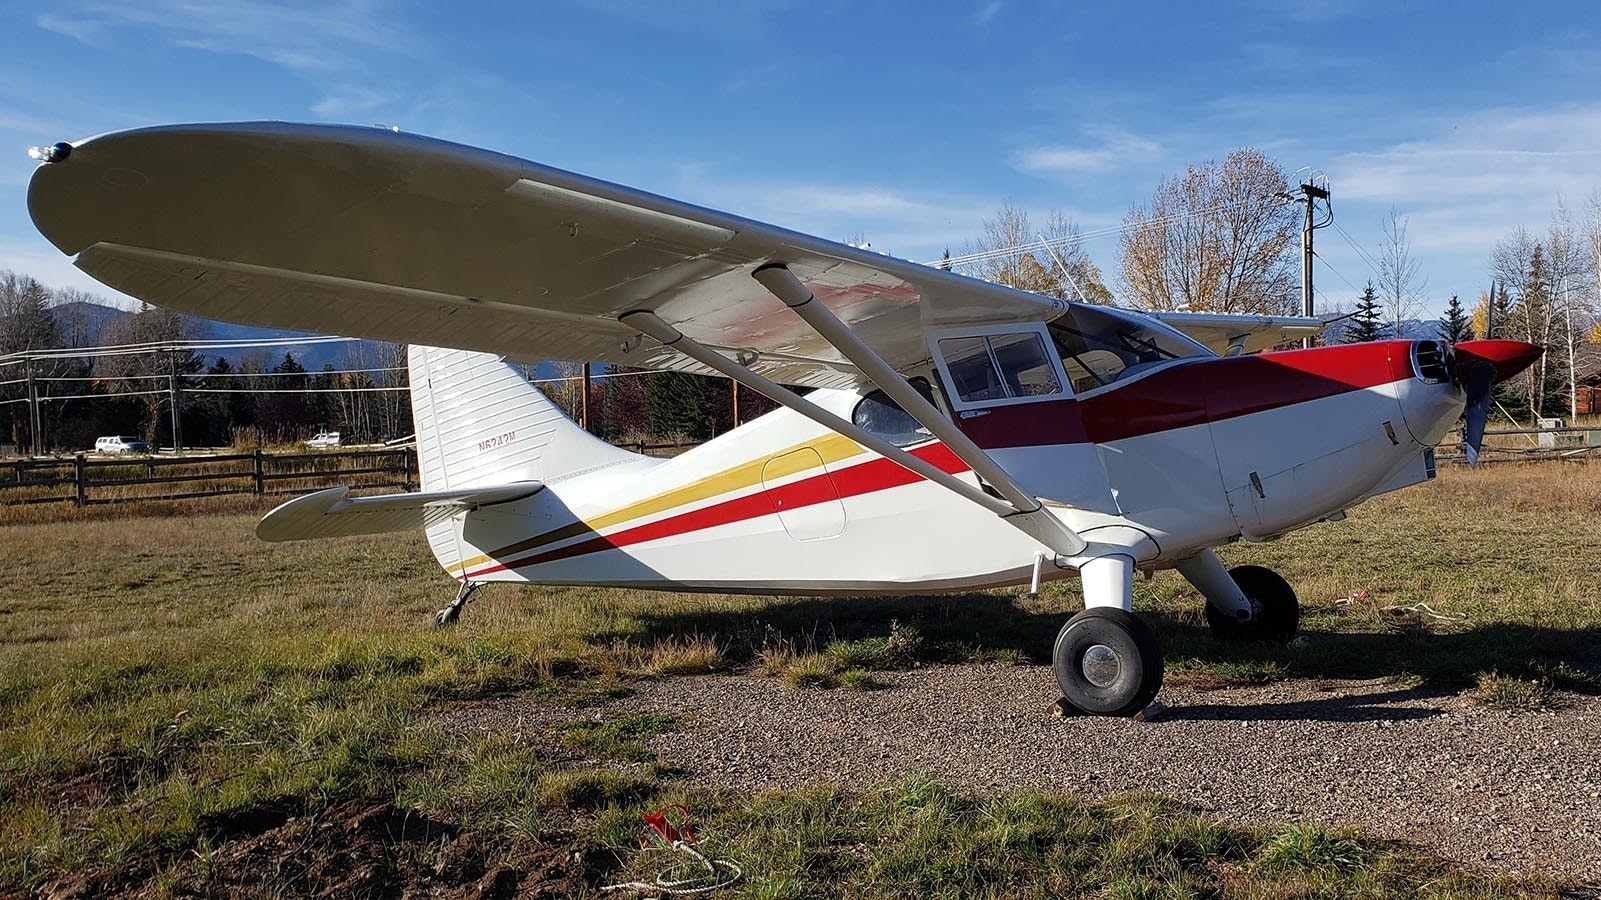 A 1948 Stinson 108-3 voyager owned by Scott "Smitty" Smith.